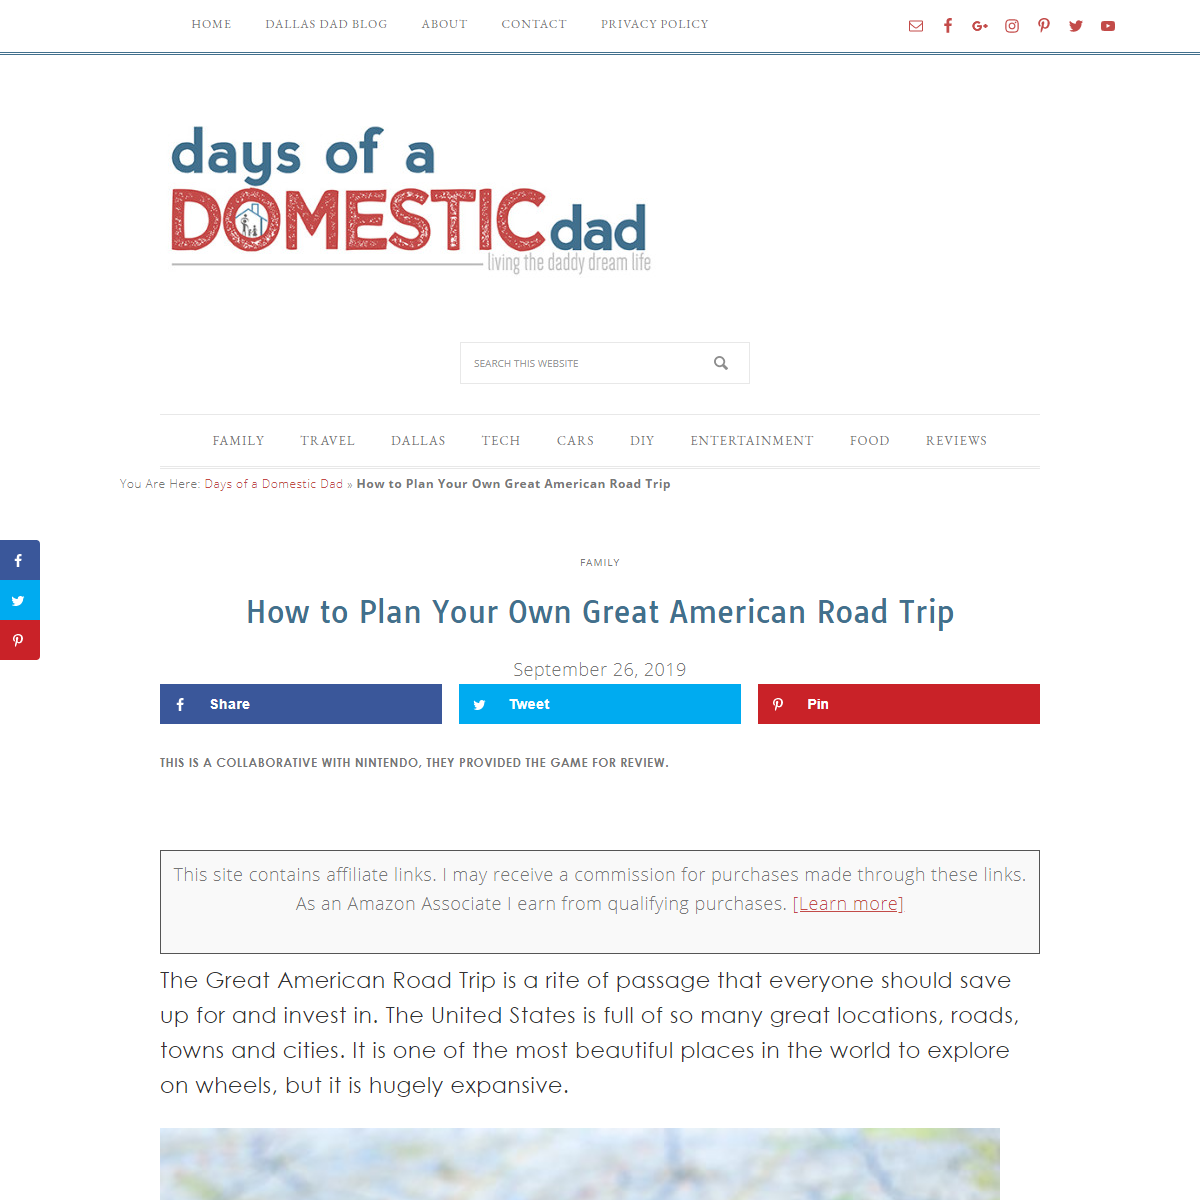 A complete backup of https://daysofadomesticdad.com/how-to-plan-your-own-great-american-road-trip/